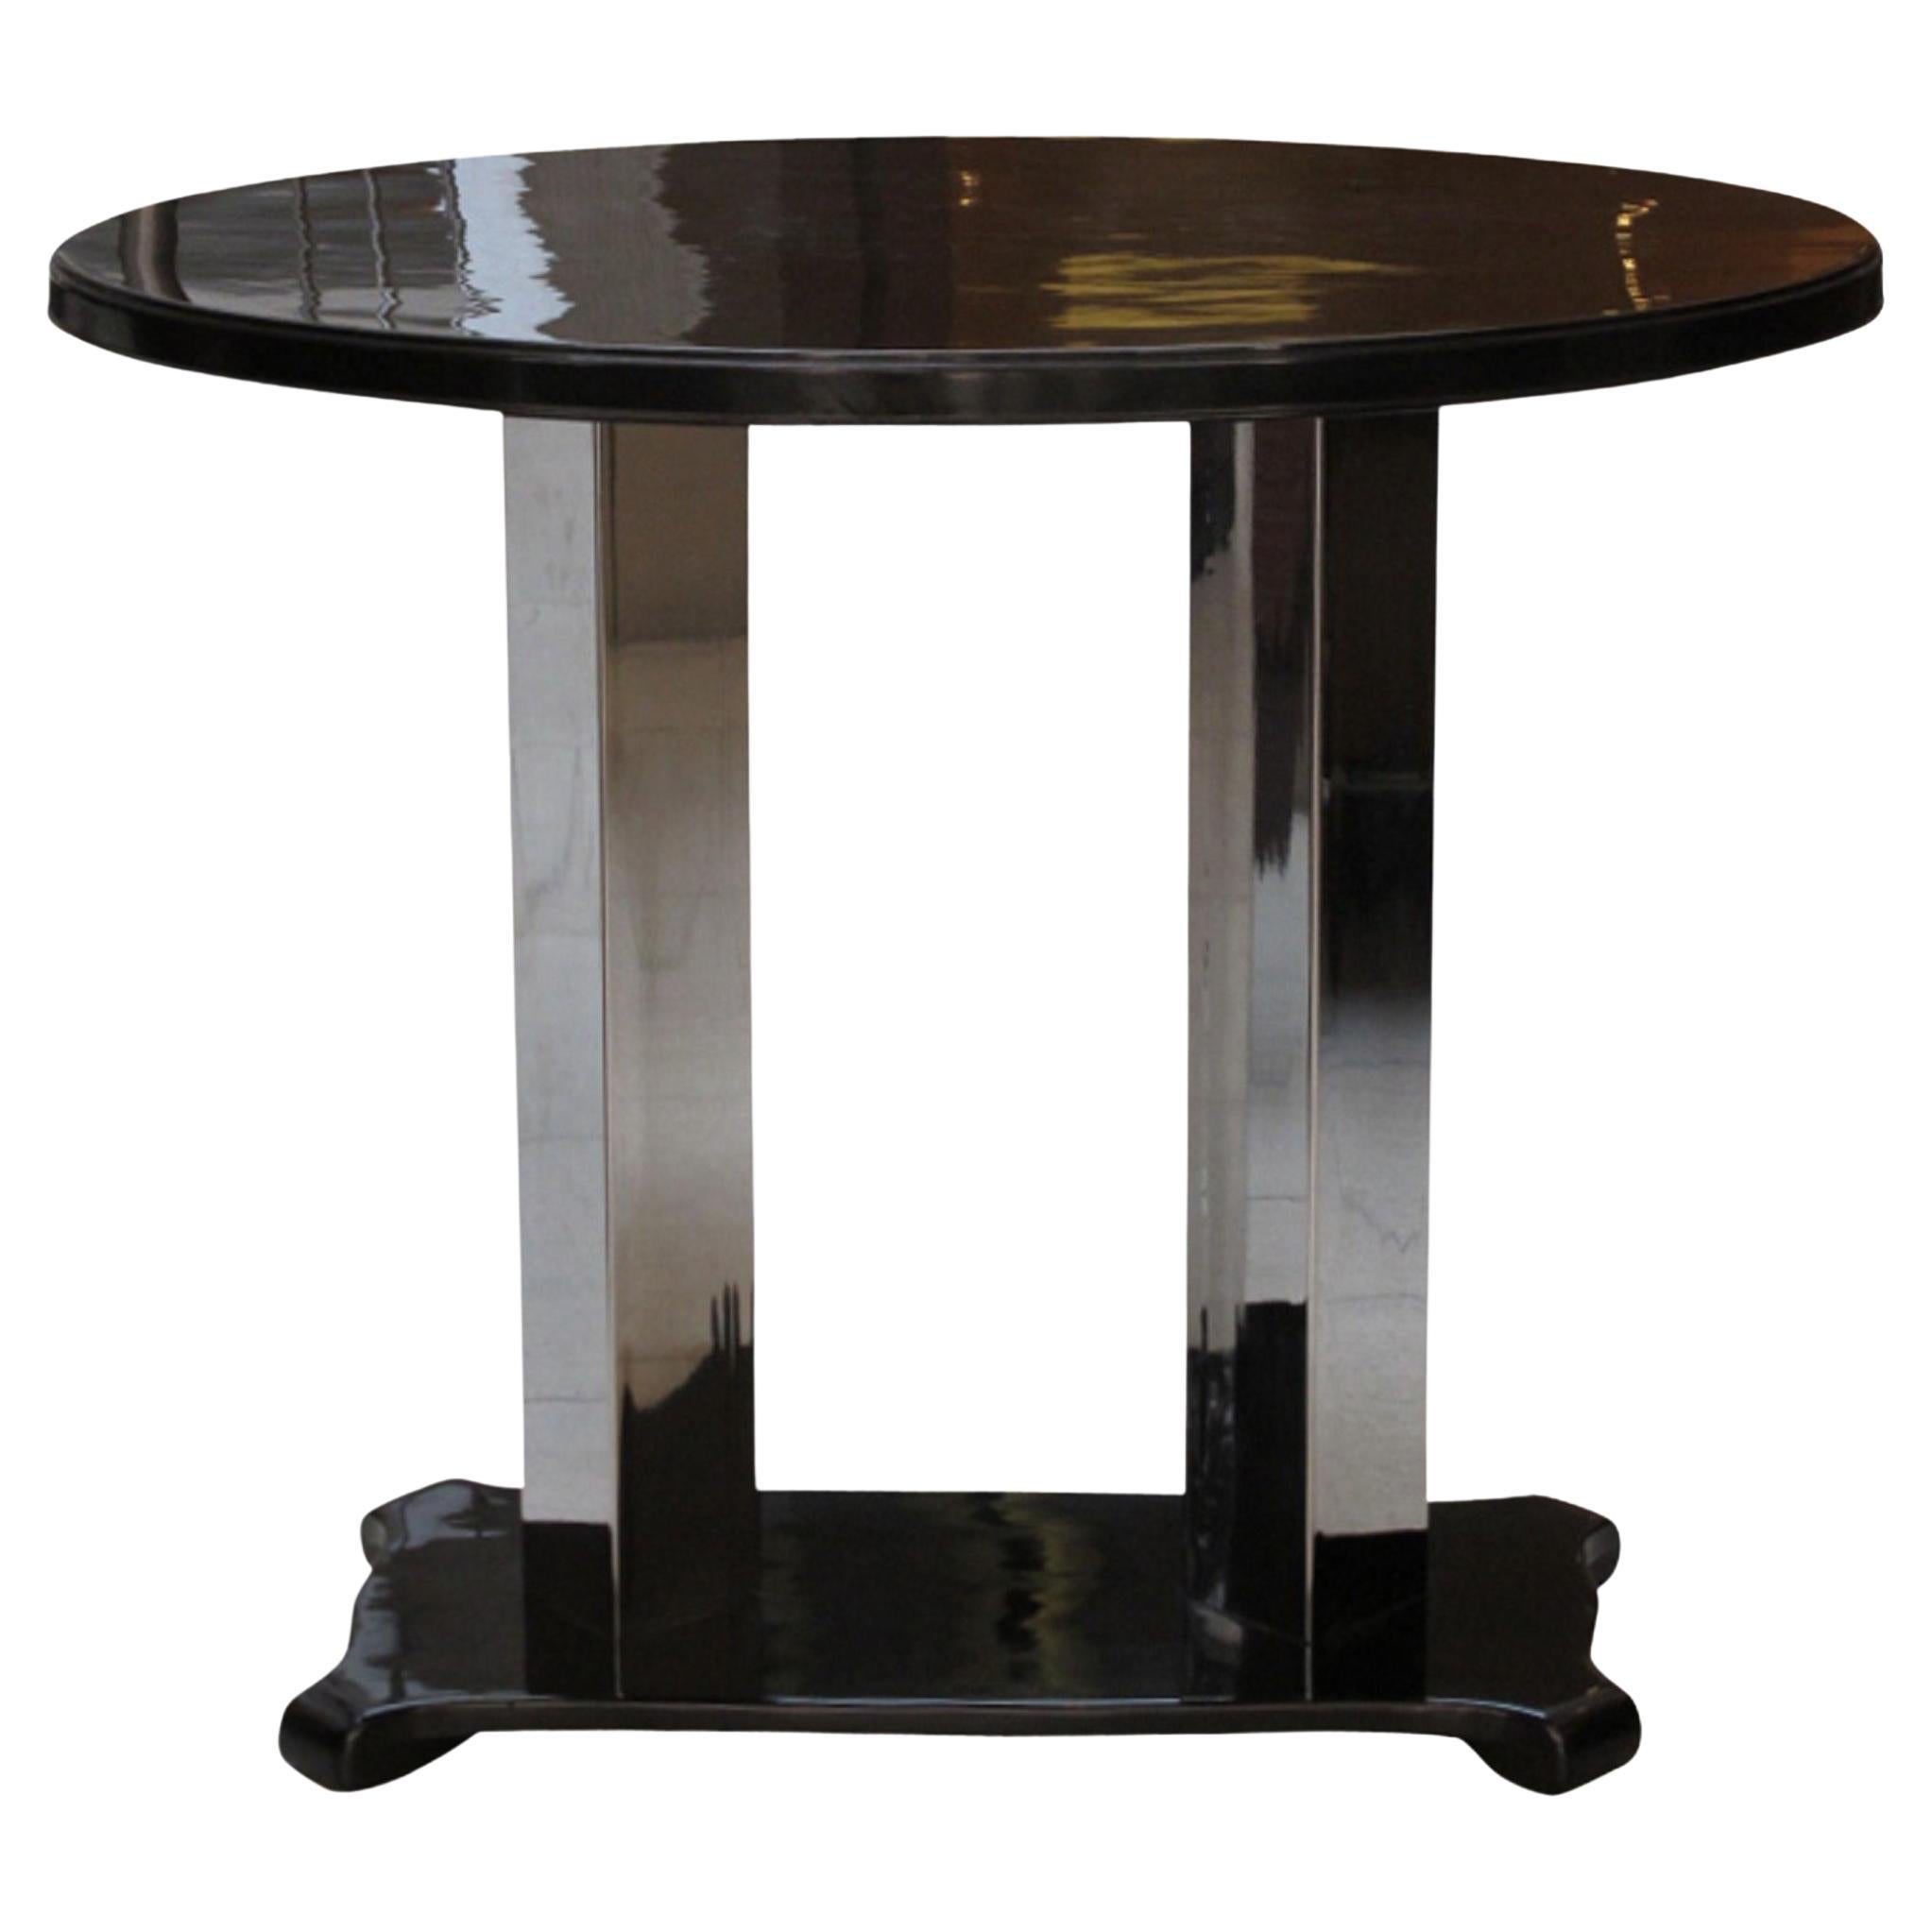 Console in Wood and Chrome, French 1930, Style, Art Deco